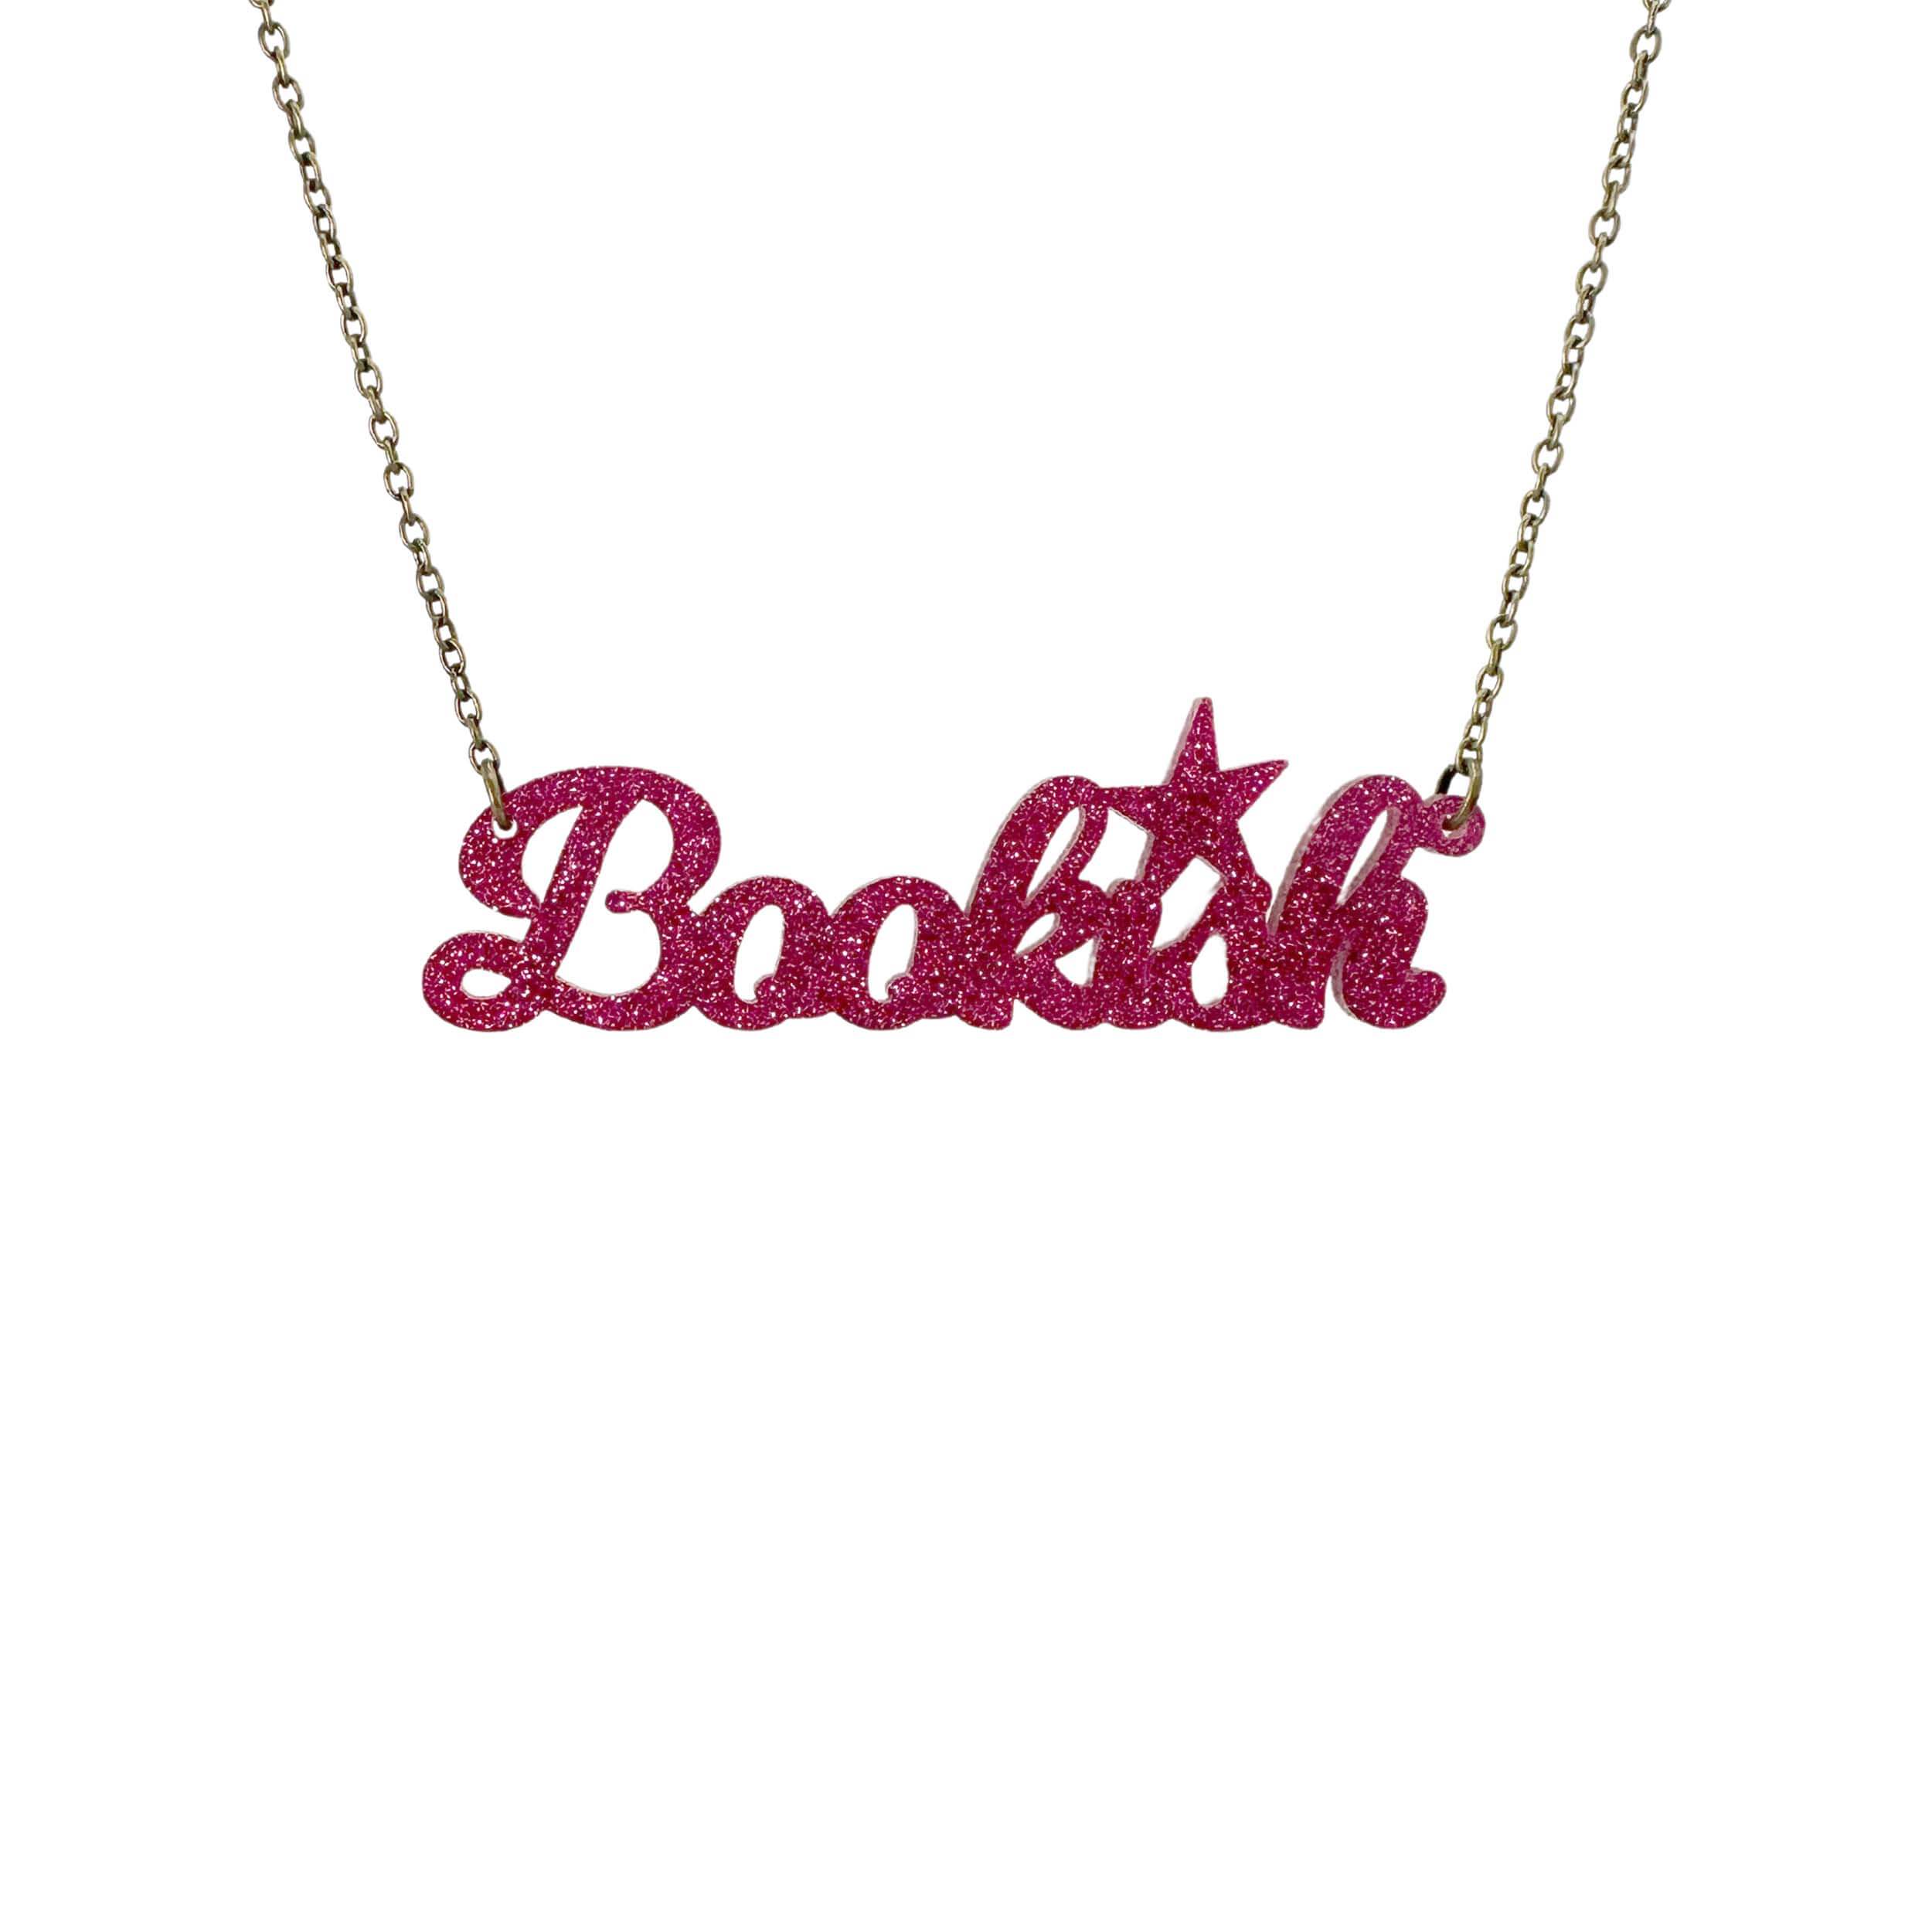 Bookish necklace in hot pink glitter shown hanging against a white backround. 